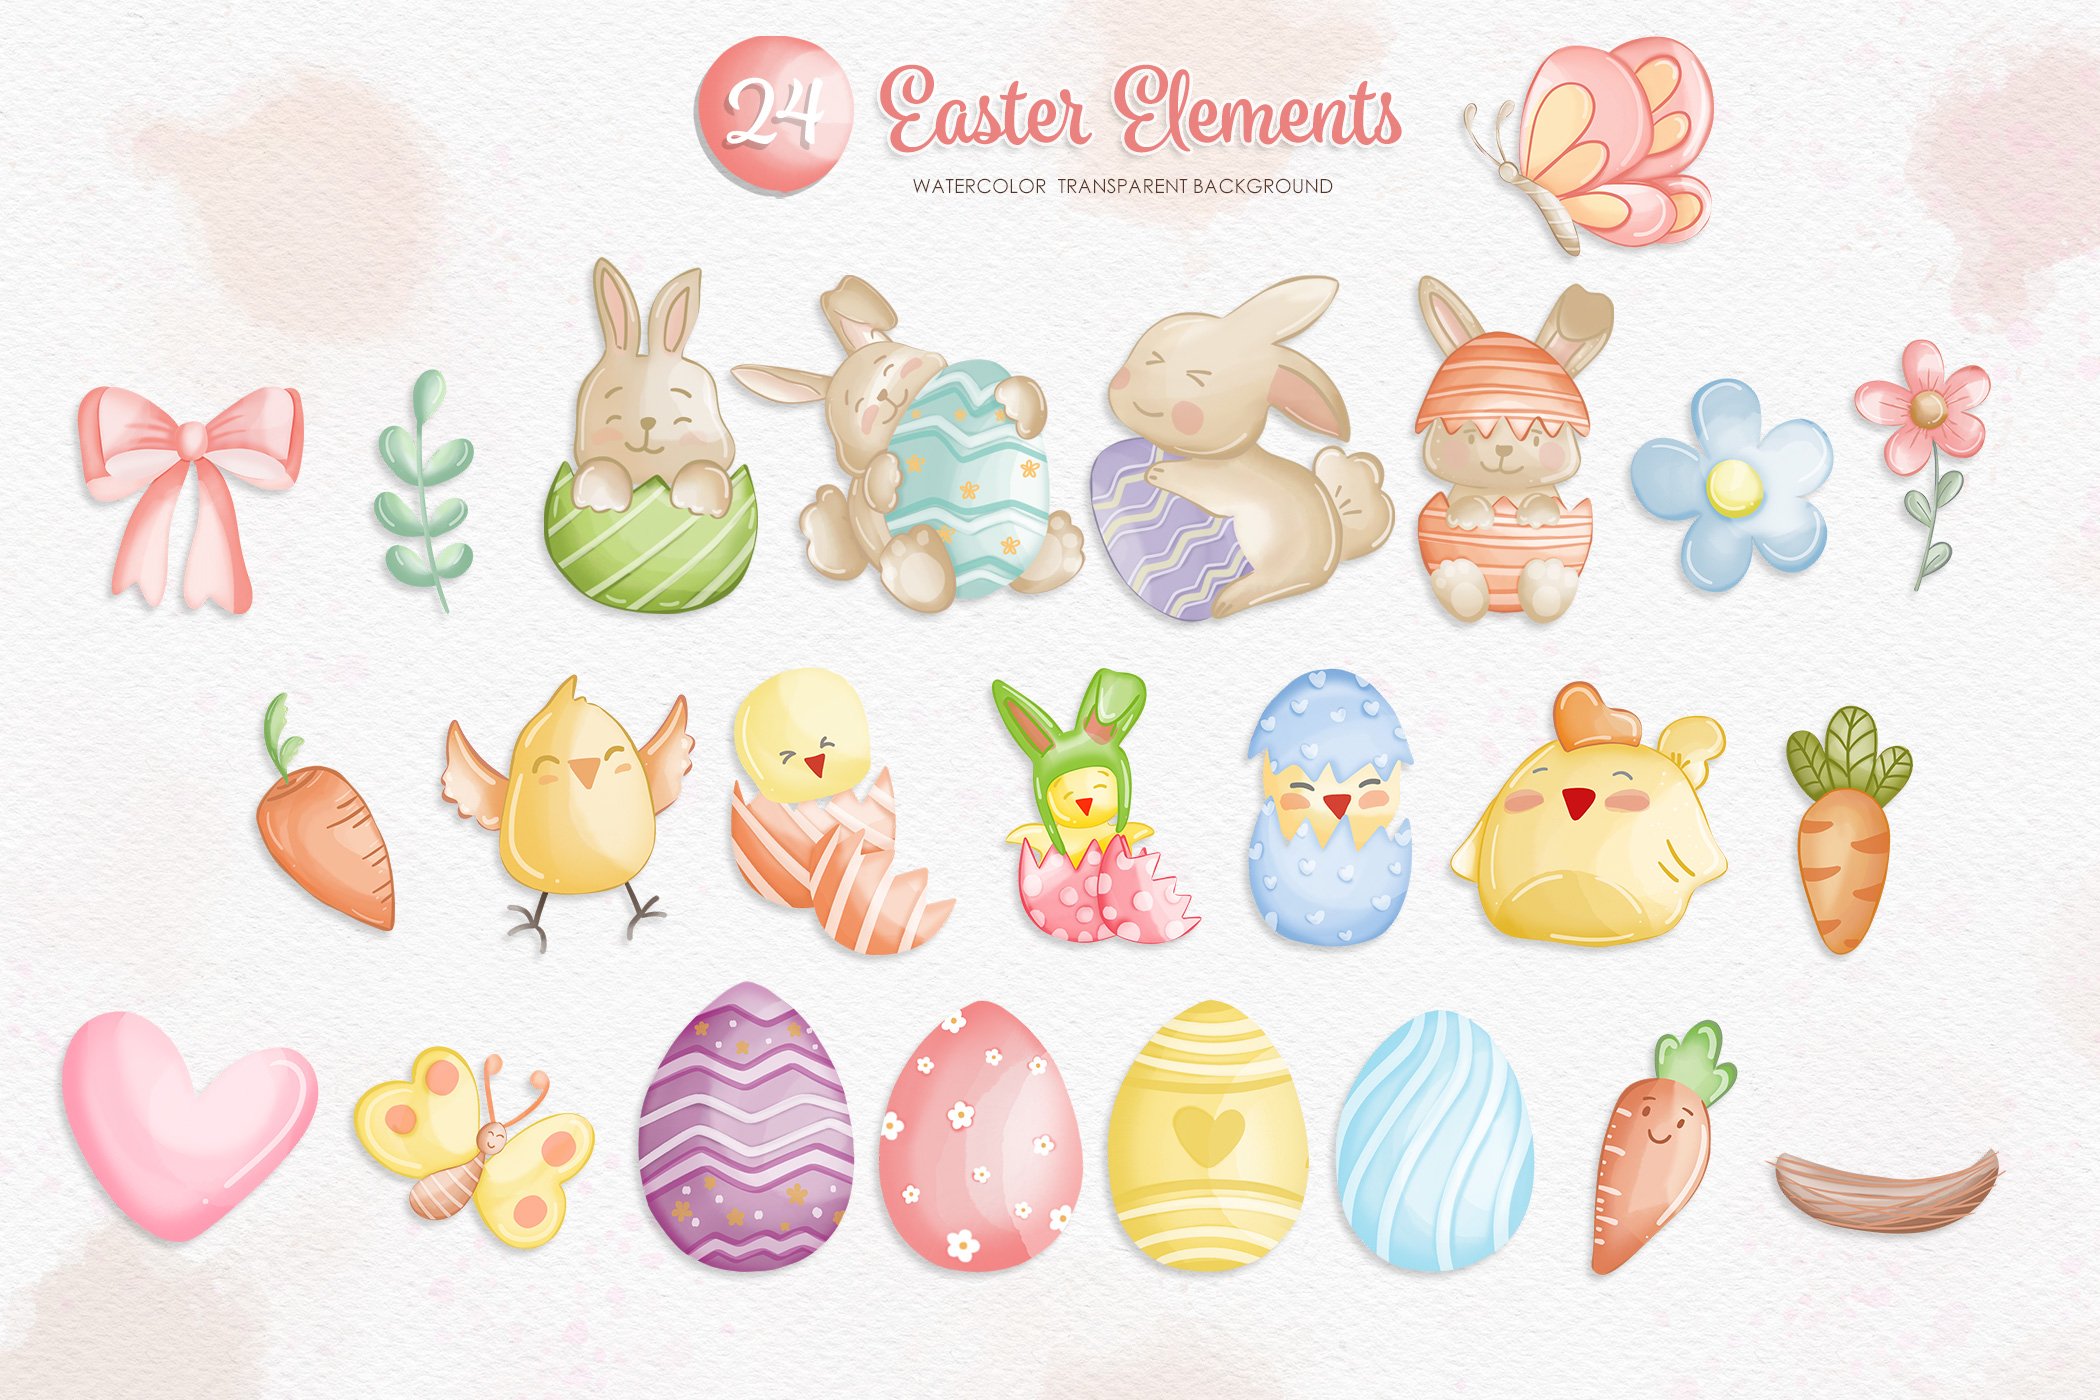 Watercolor Easter Bunny | Easter Egg And Elements